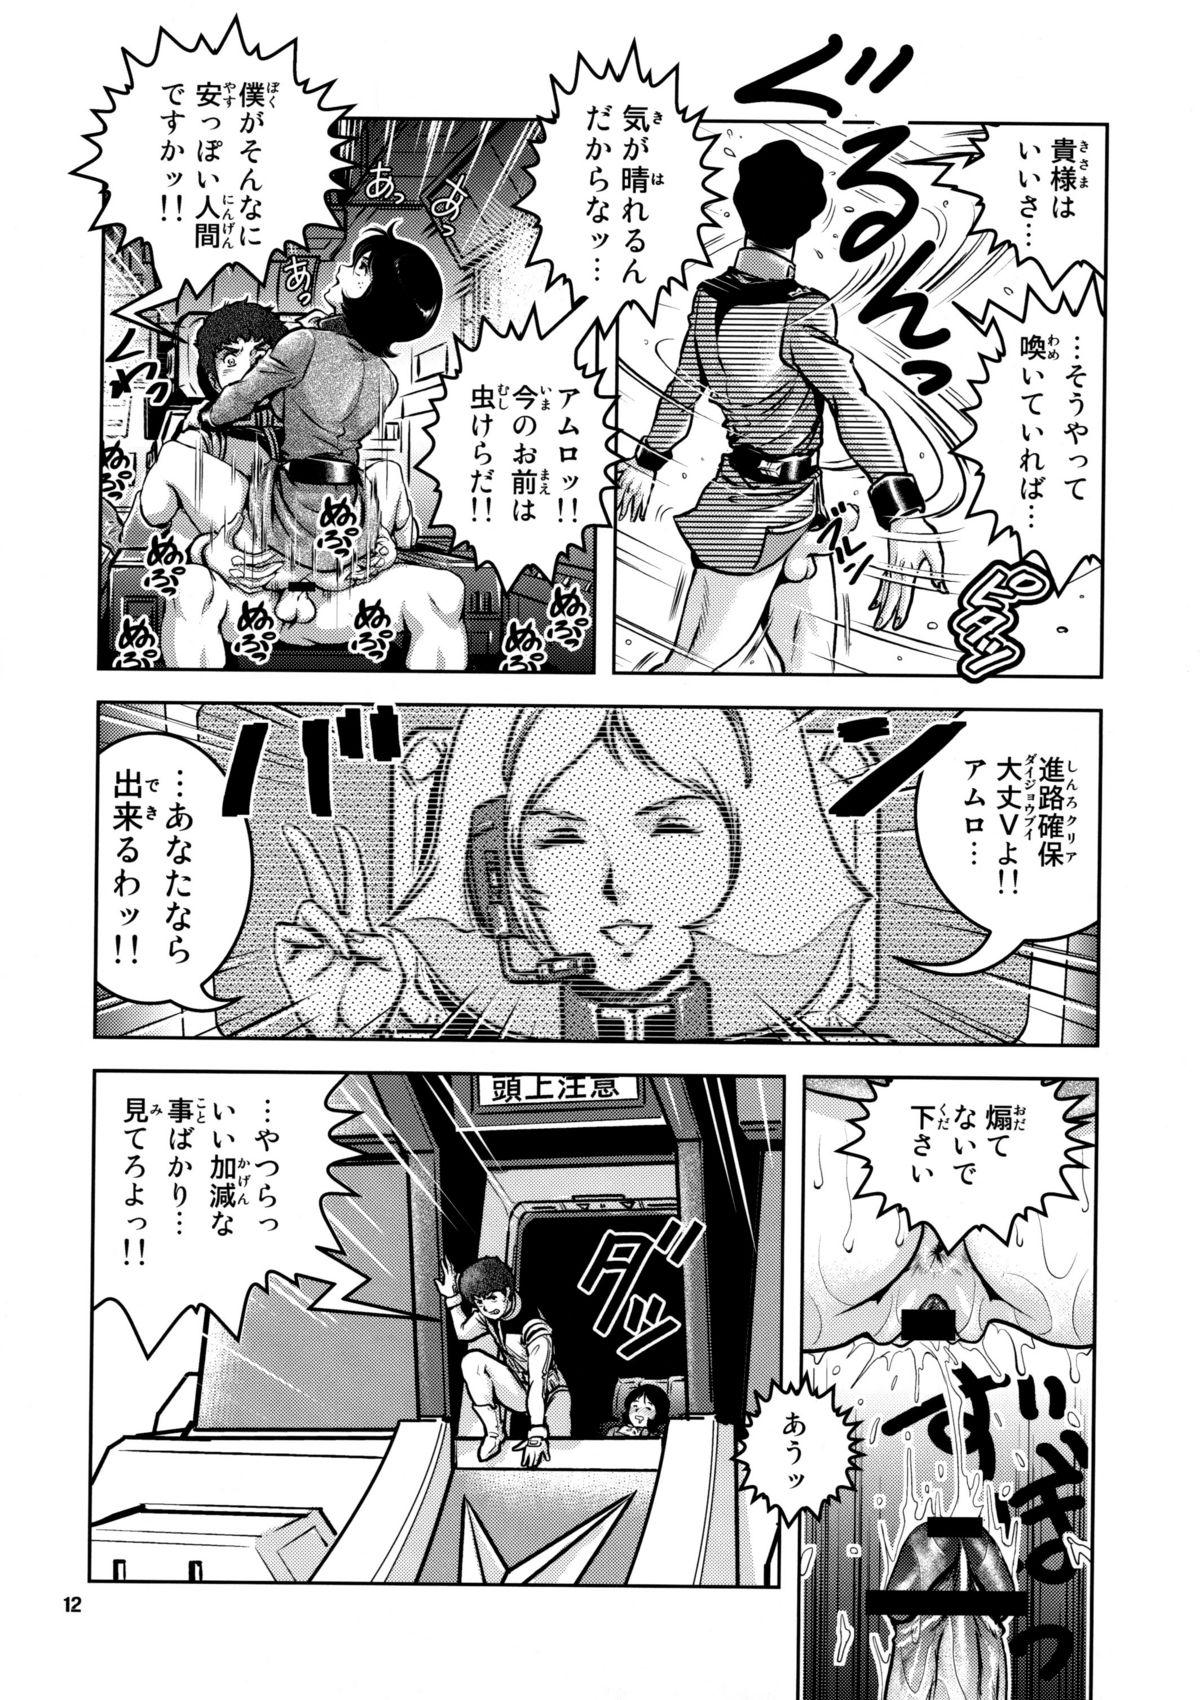 Hard Sex No Panties White Base - Mobile suit gundam From - Page 12